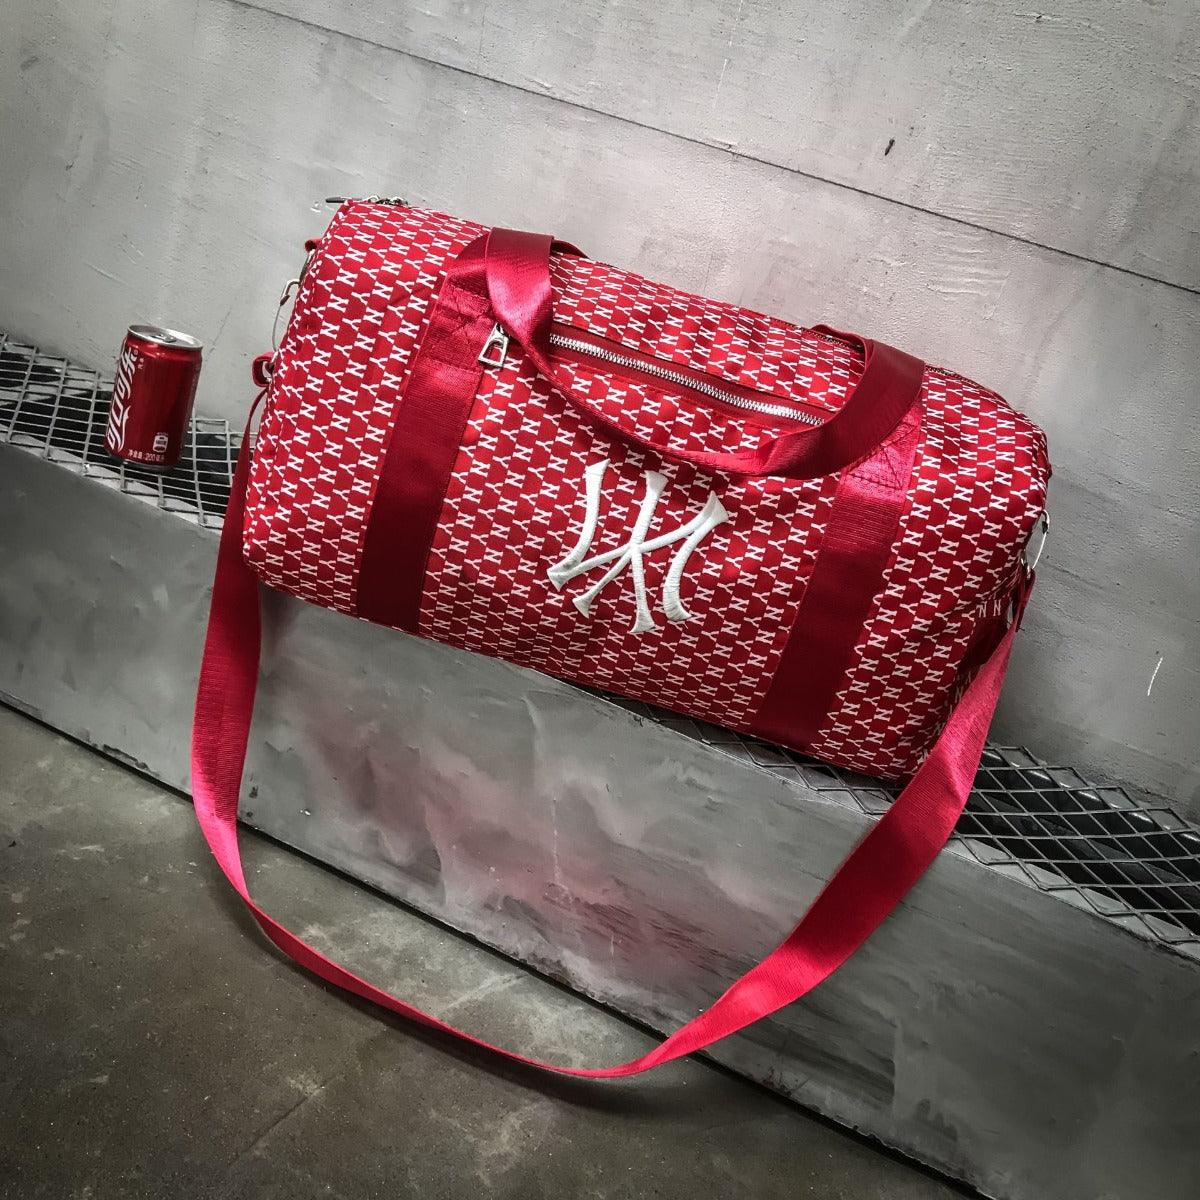 NY Topnotch Classic Designed Multi-Functional Travel Bag- Red - Obeezi.com